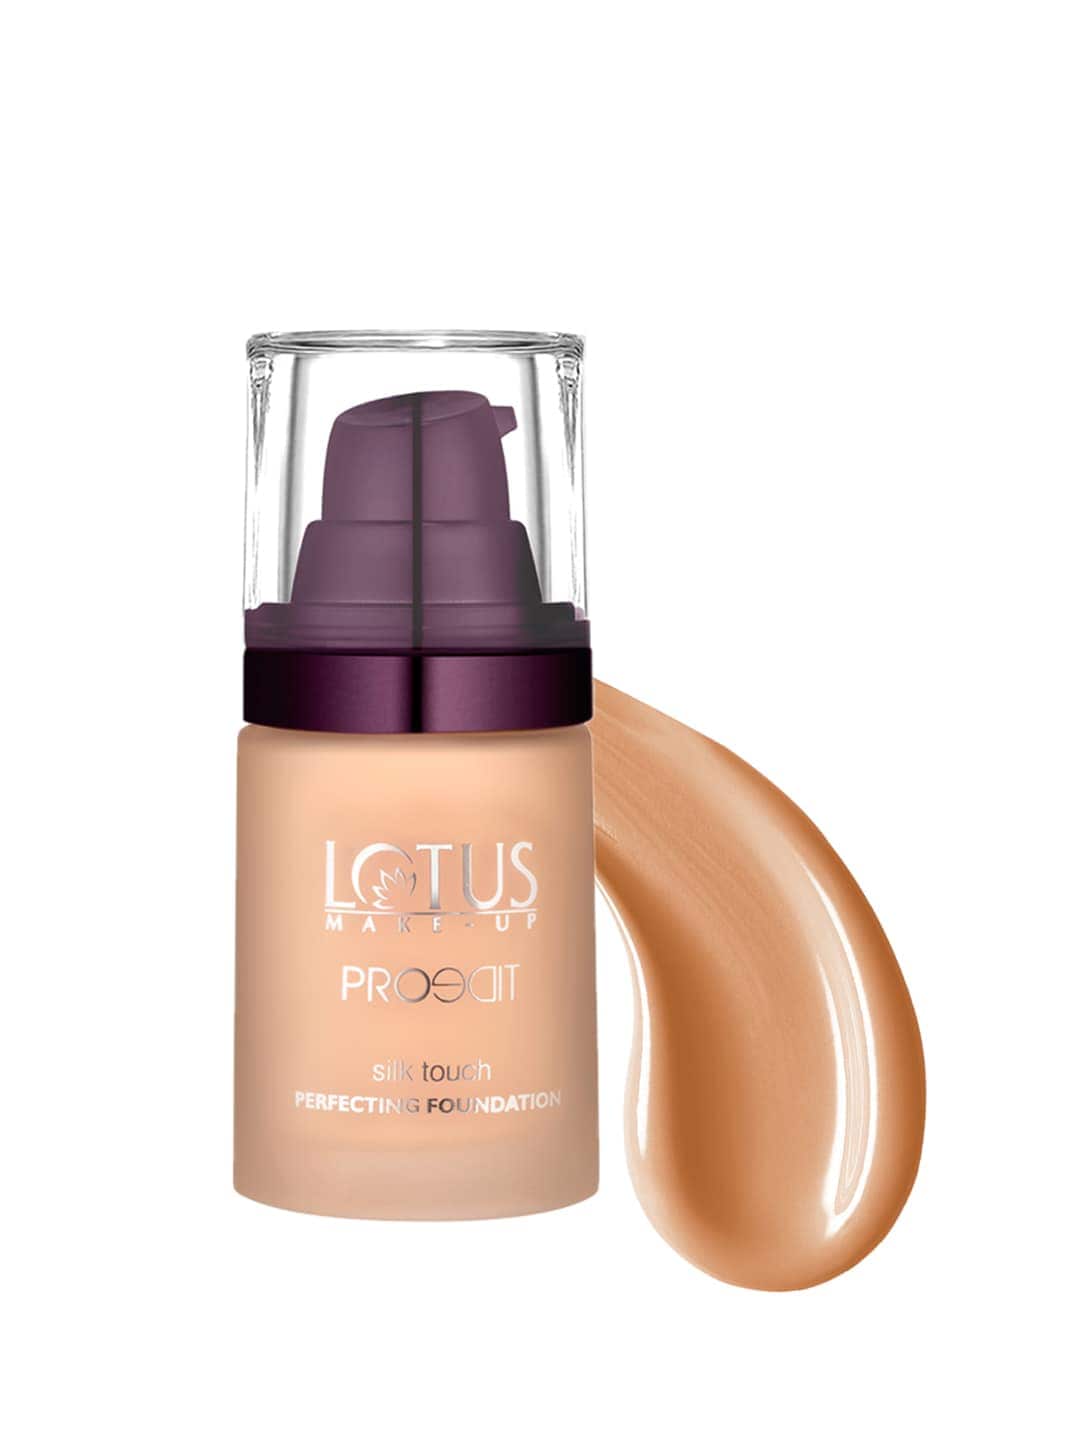 Lotus Herbals Sustainable Make-Up Proedit Silk Touch Perfecting Foundation - Almond SF04 30ml Price in India